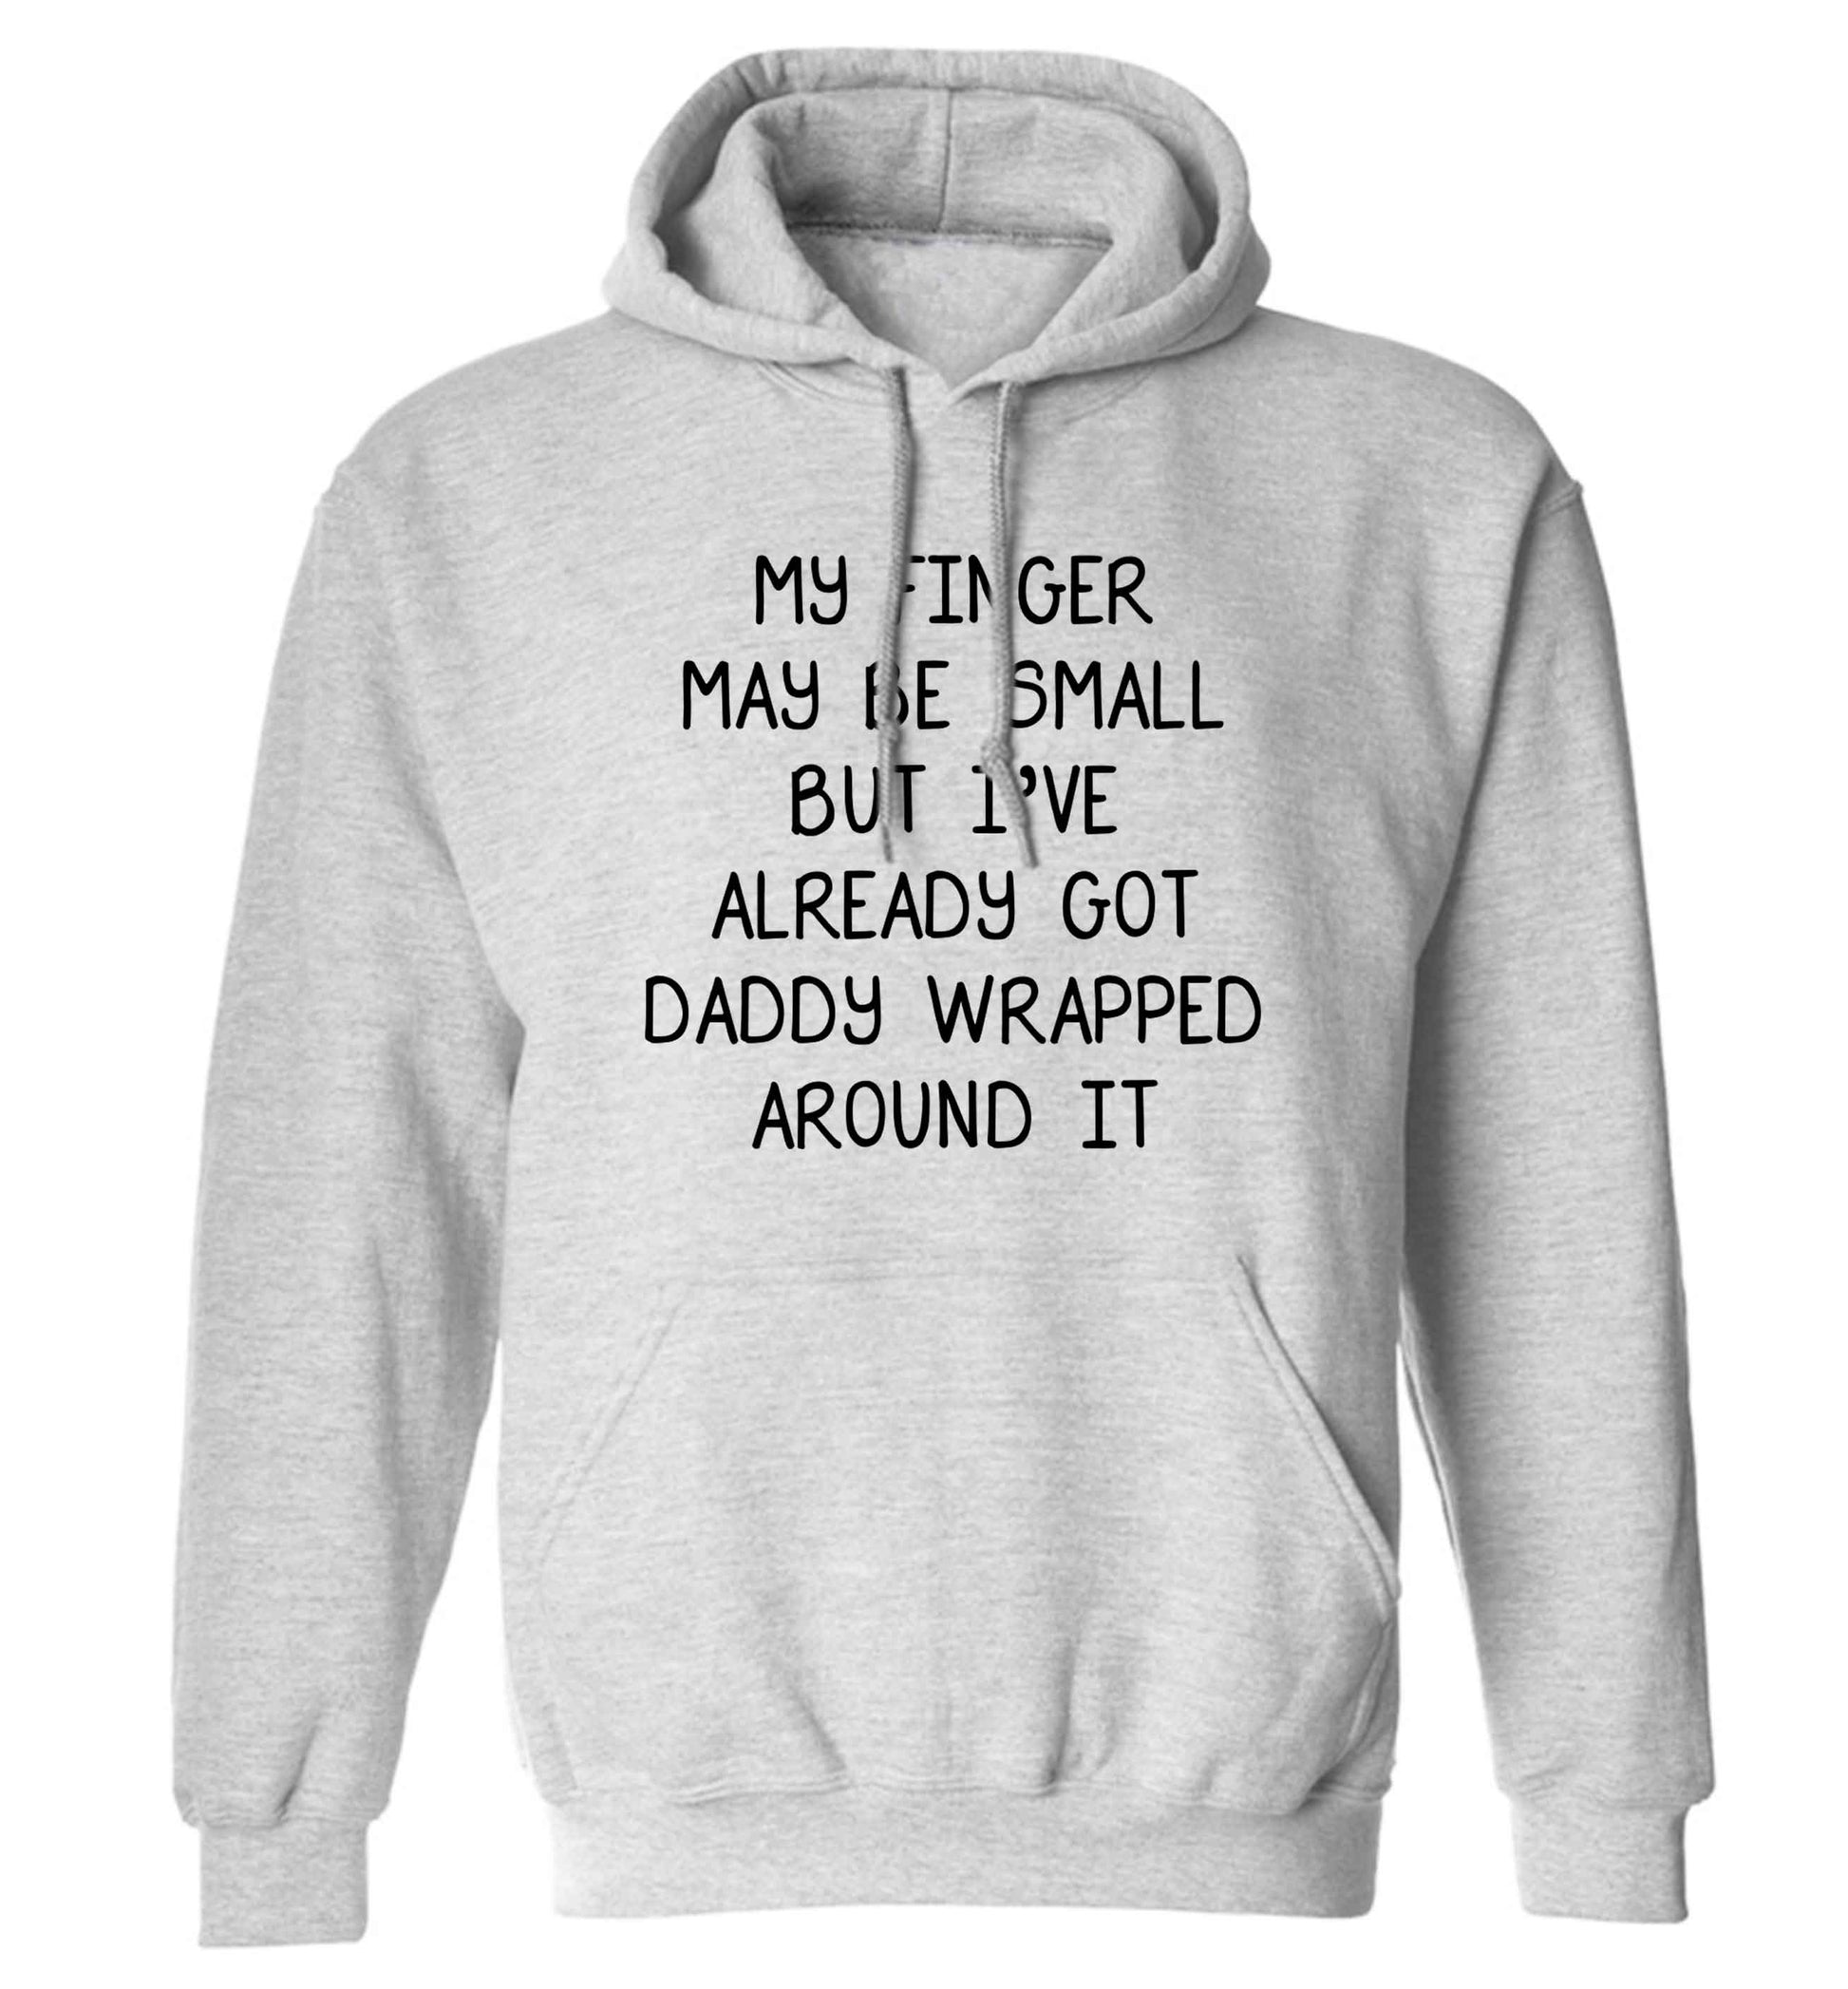 My finger may be small but I've already got daddy wrapped around it adults unisex grey hoodie 2XL